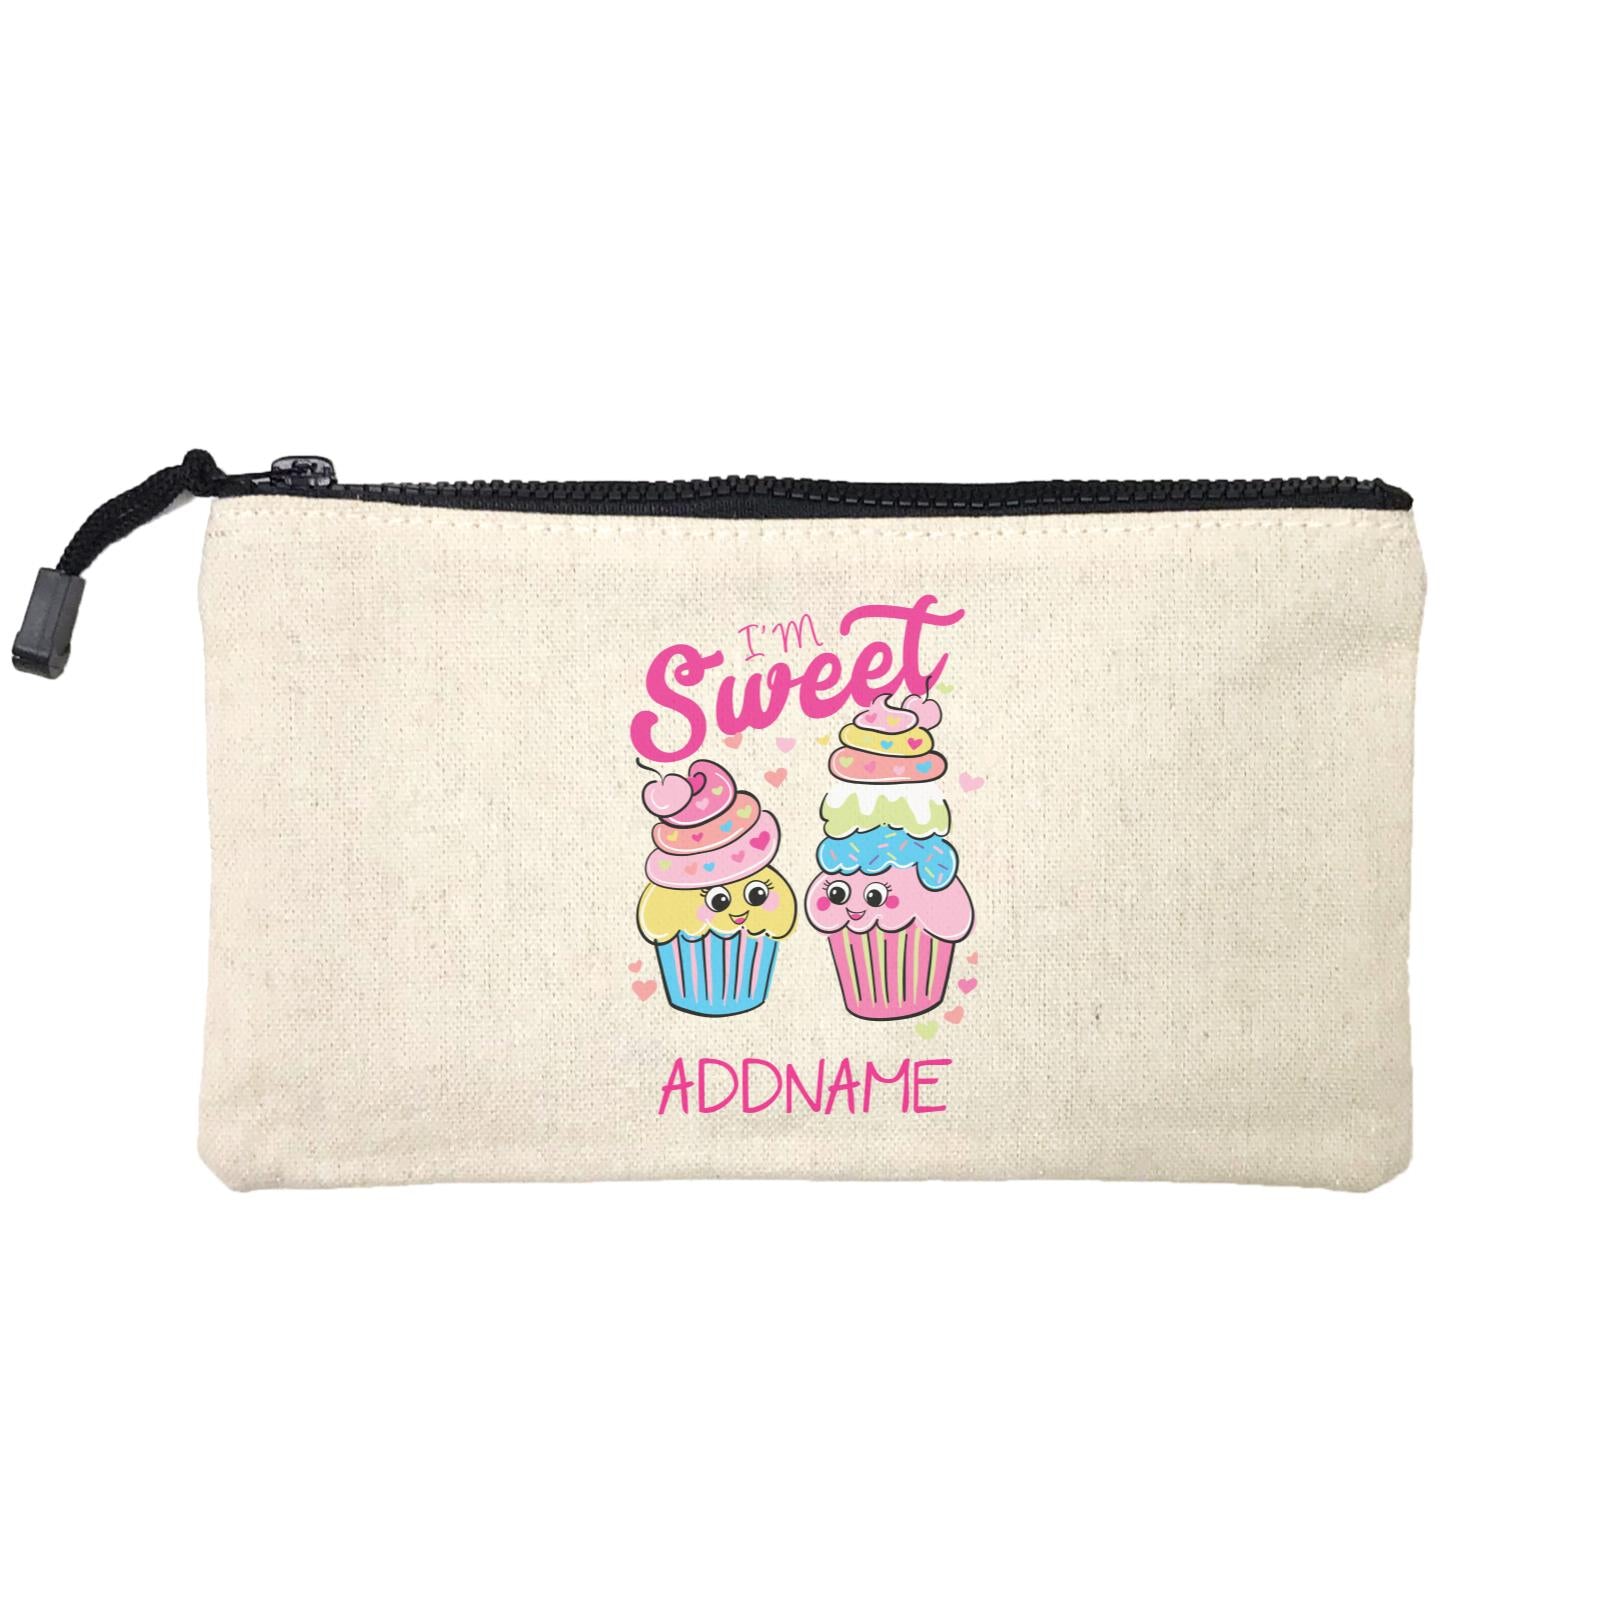 Cool Vibrant Series I'm Sweet Cupcakes Addname Mini Accessories Stationery Pouch